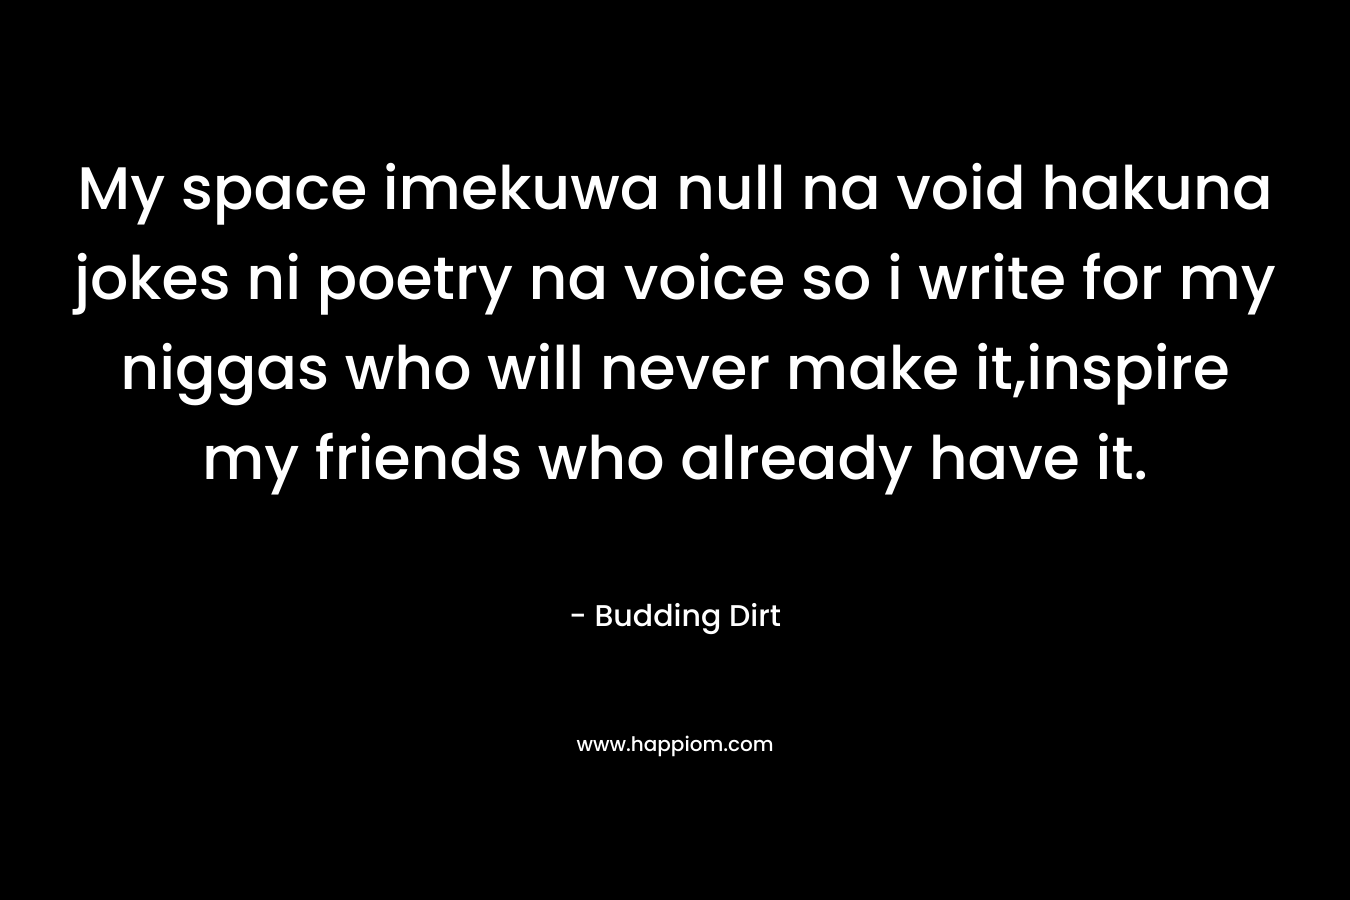 My space imekuwa null na void hakuna jokes ni poetry na voice so i write for my niggas who will never make it,inspire my friends who already have it. – Budding Dirt